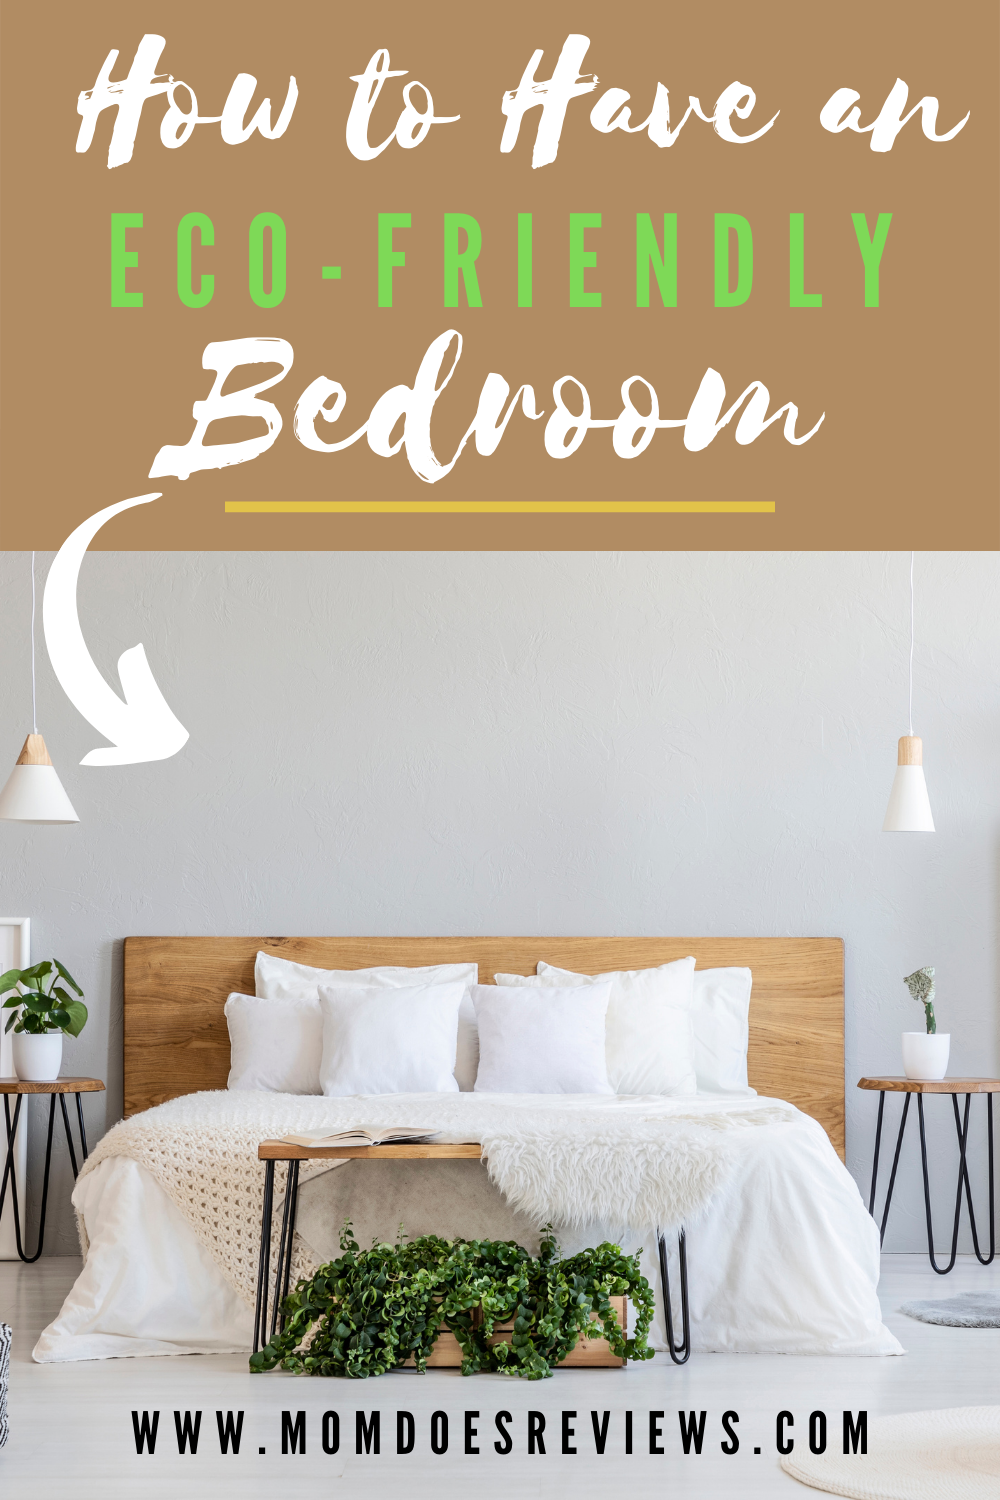 How to Have an Eco-Friendly Bedroom